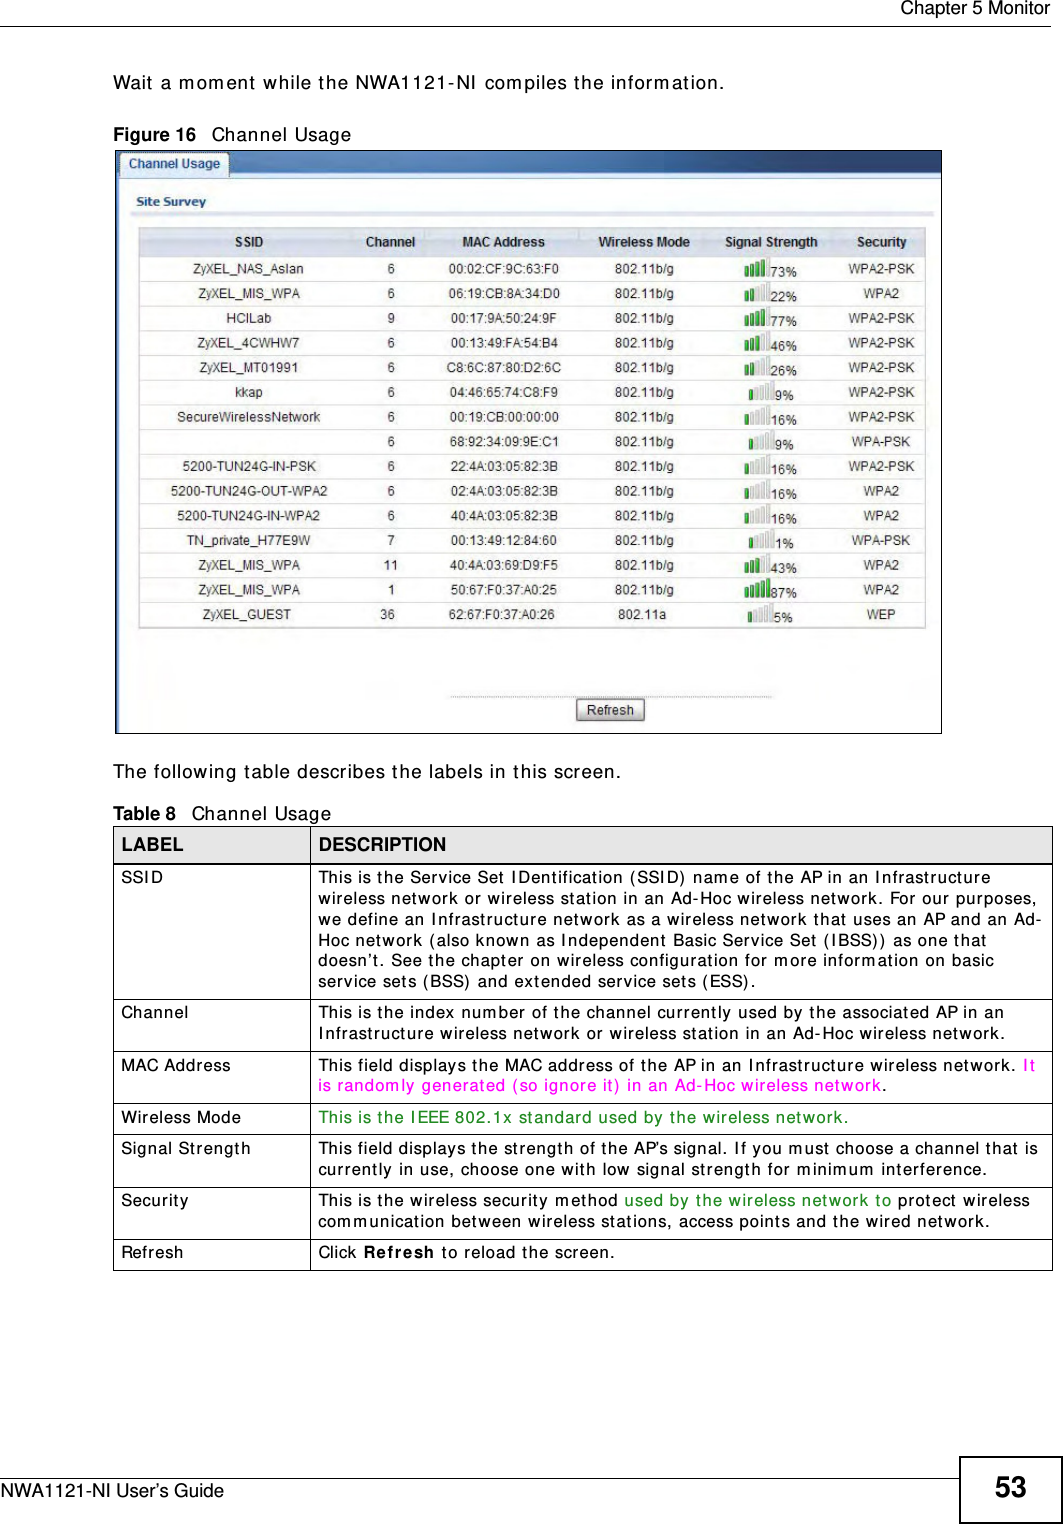  Chapter 5 MonitorNWA1121-NI User’s Guide 53Wait a moment while the NWA1121-NI compiles the information.Figure 16   Channel Usage The following table describes the labels in this screen.Table 8   Channel UsageLABEL DESCRIPTIONSSID This is the Service Set IDentification (SSID) name of the AP in an Infrastructure wireless network or wireless station in an Ad-Hoc wireless network. For our purposes, we define an Infrastructure network as a wireless network that uses an AP and an Ad-Hoc network (also known as Independent Basic Service Set (IBSS)) as one that doesn’t. See the chapter on wireless configuration for more information on basic service sets (BSS) and extended service sets (ESS).Channel This is the index number of the channel currently used by the associated AP in an Infrastructure wireless network or wireless station in an Ad-Hoc wireless network.MAC Address This field displays the MAC address of the AP in an Infrastructure wireless network. It is randomly generated (so ignore it) in an Ad-Hoc wireless network.Wireless Mode This is the IEEE 802.1x standard used by the wireless network.Signal Strength This field displays the strength of the AP’s signal. If you must choose a channel that is currently in use, choose one with low signal strength for minimum interference.Security This is the wireless security method used by the wireless network to protect wireless communication between wireless stations, access points and the wired network.Refresh Click Refresh to reload the screen.